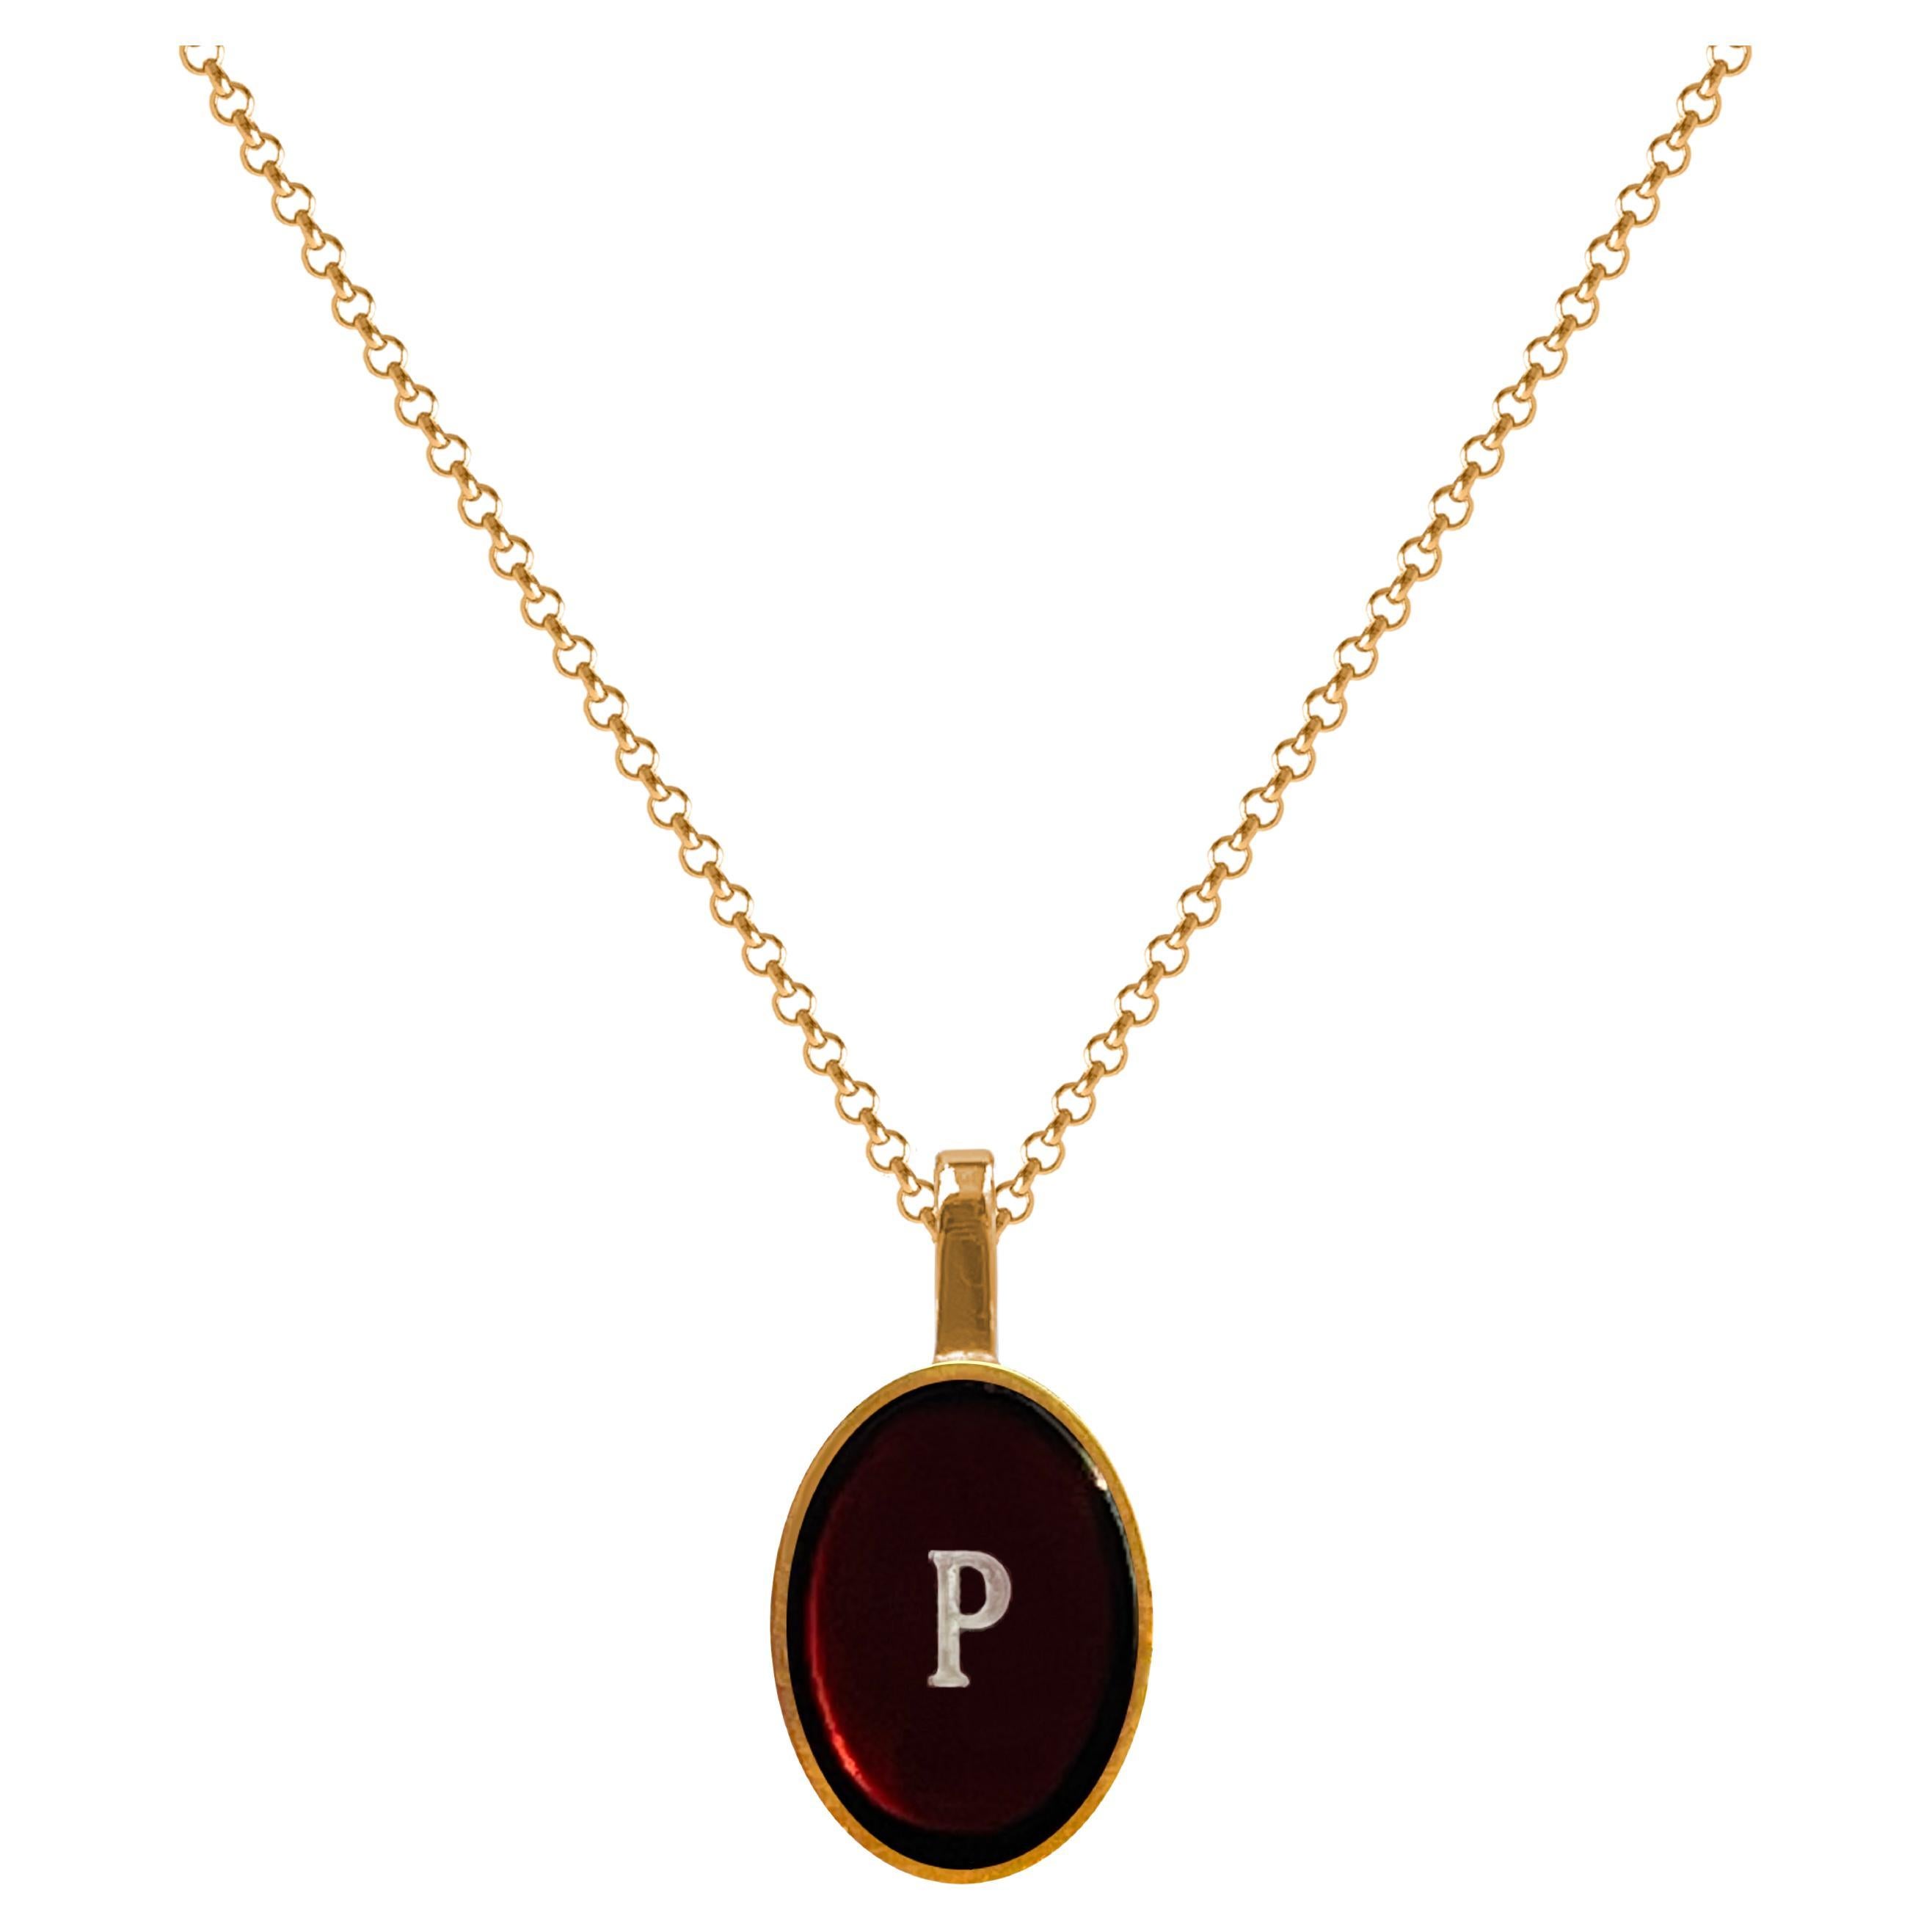 Necklace with amber pendant and name letter gold - P